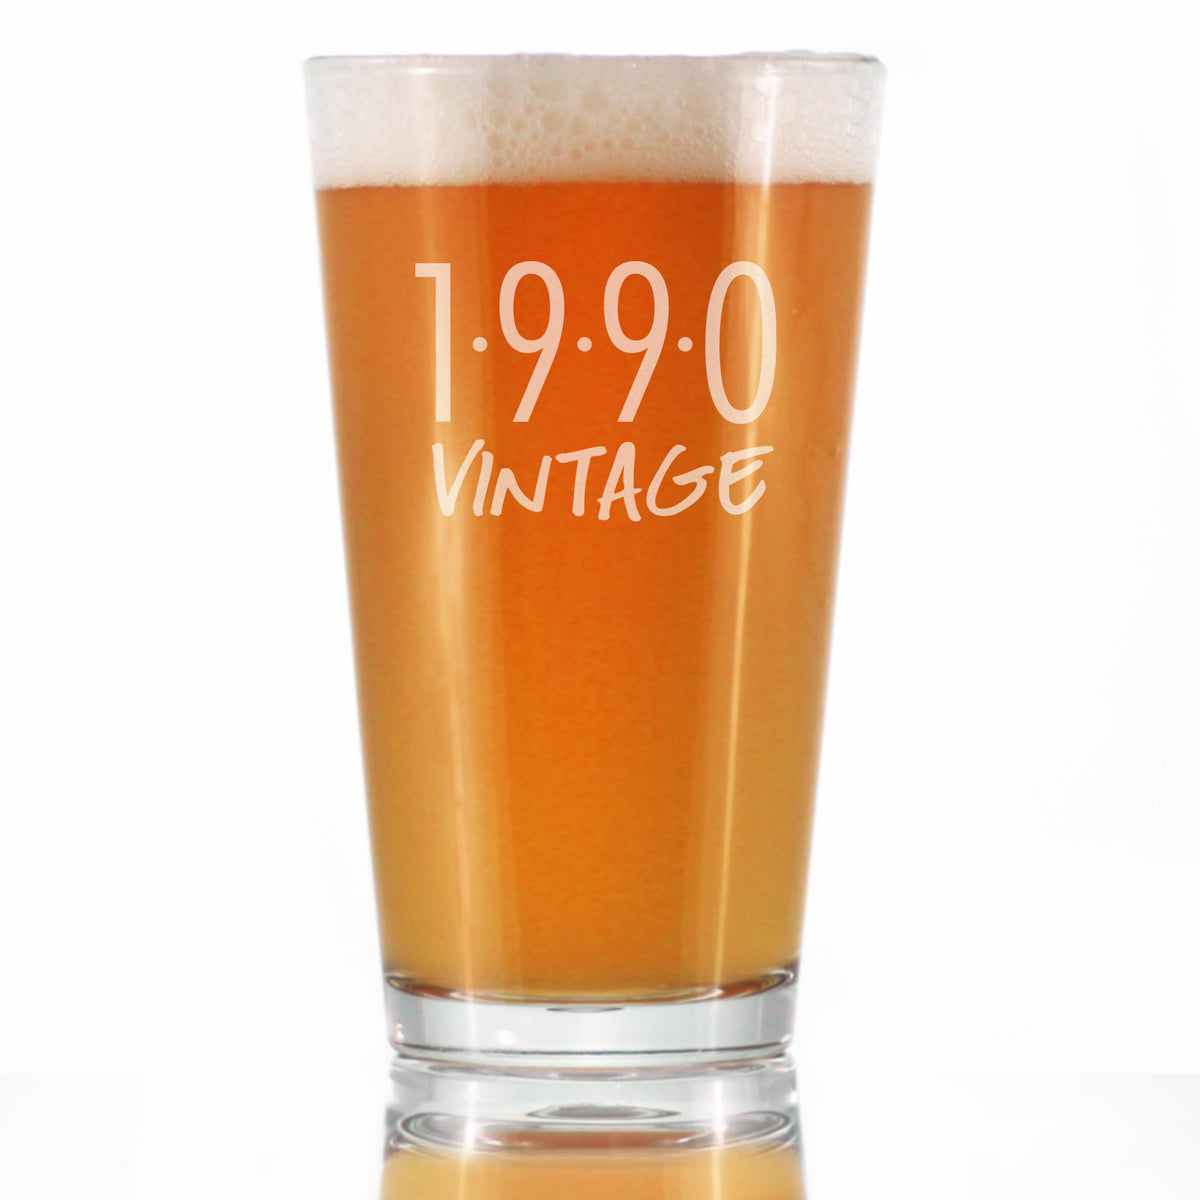 Vintage 1990 - Pint Glass for Beer - 34th Birthday Gifts for Men or Women Turning 34 - Fun Bday Party Decor - 16 oz